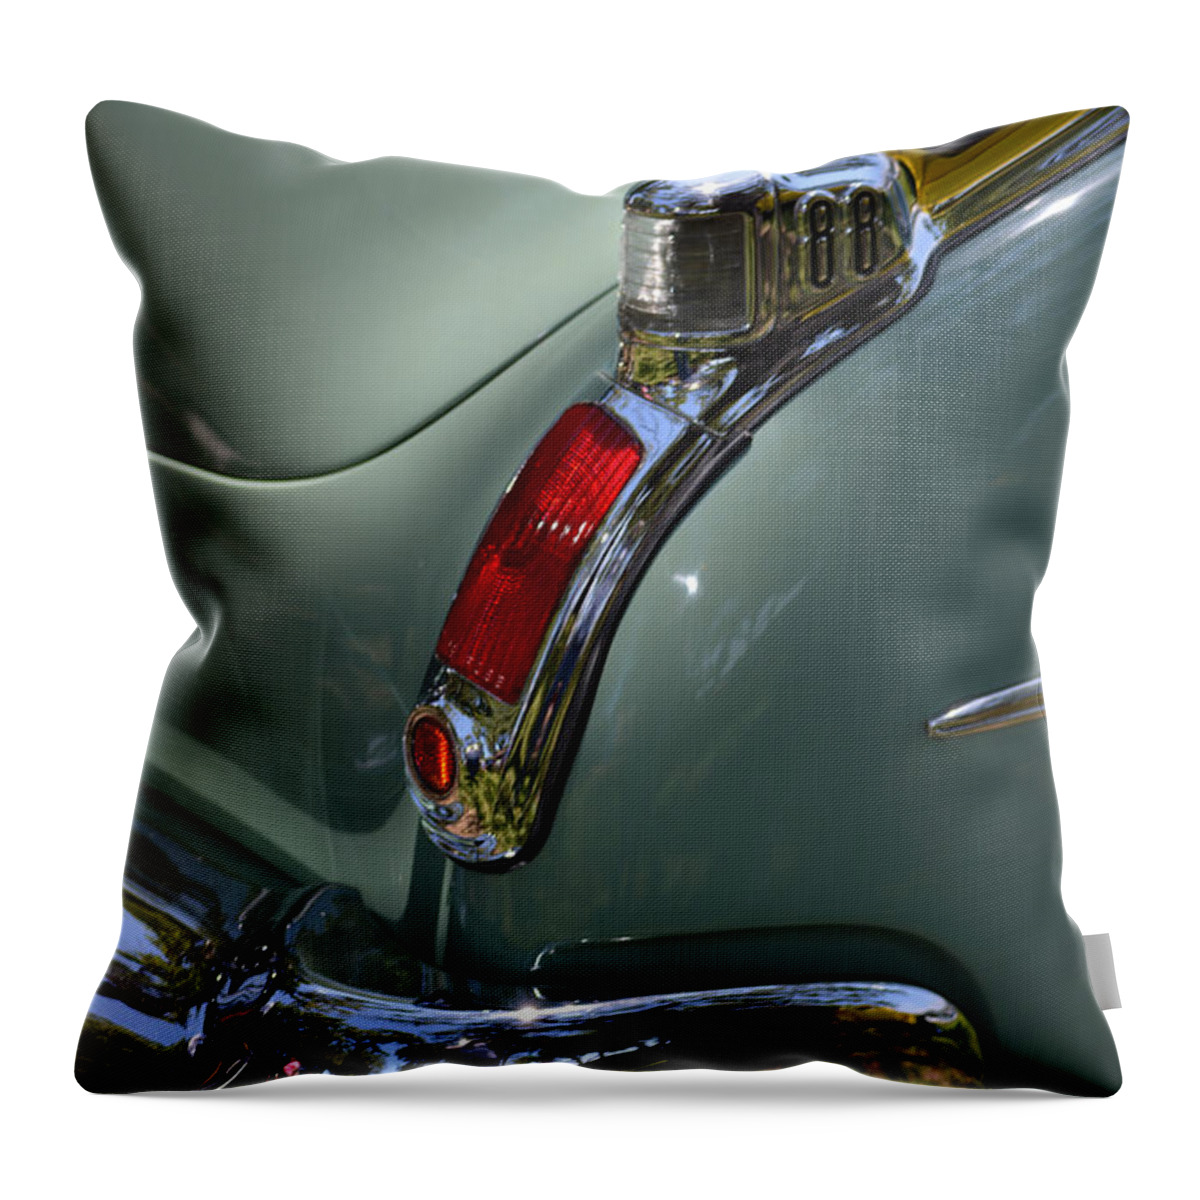 Olds Throw Pillow featuring the photograph Oldsmobile 88 by Gale Cochran-Smith